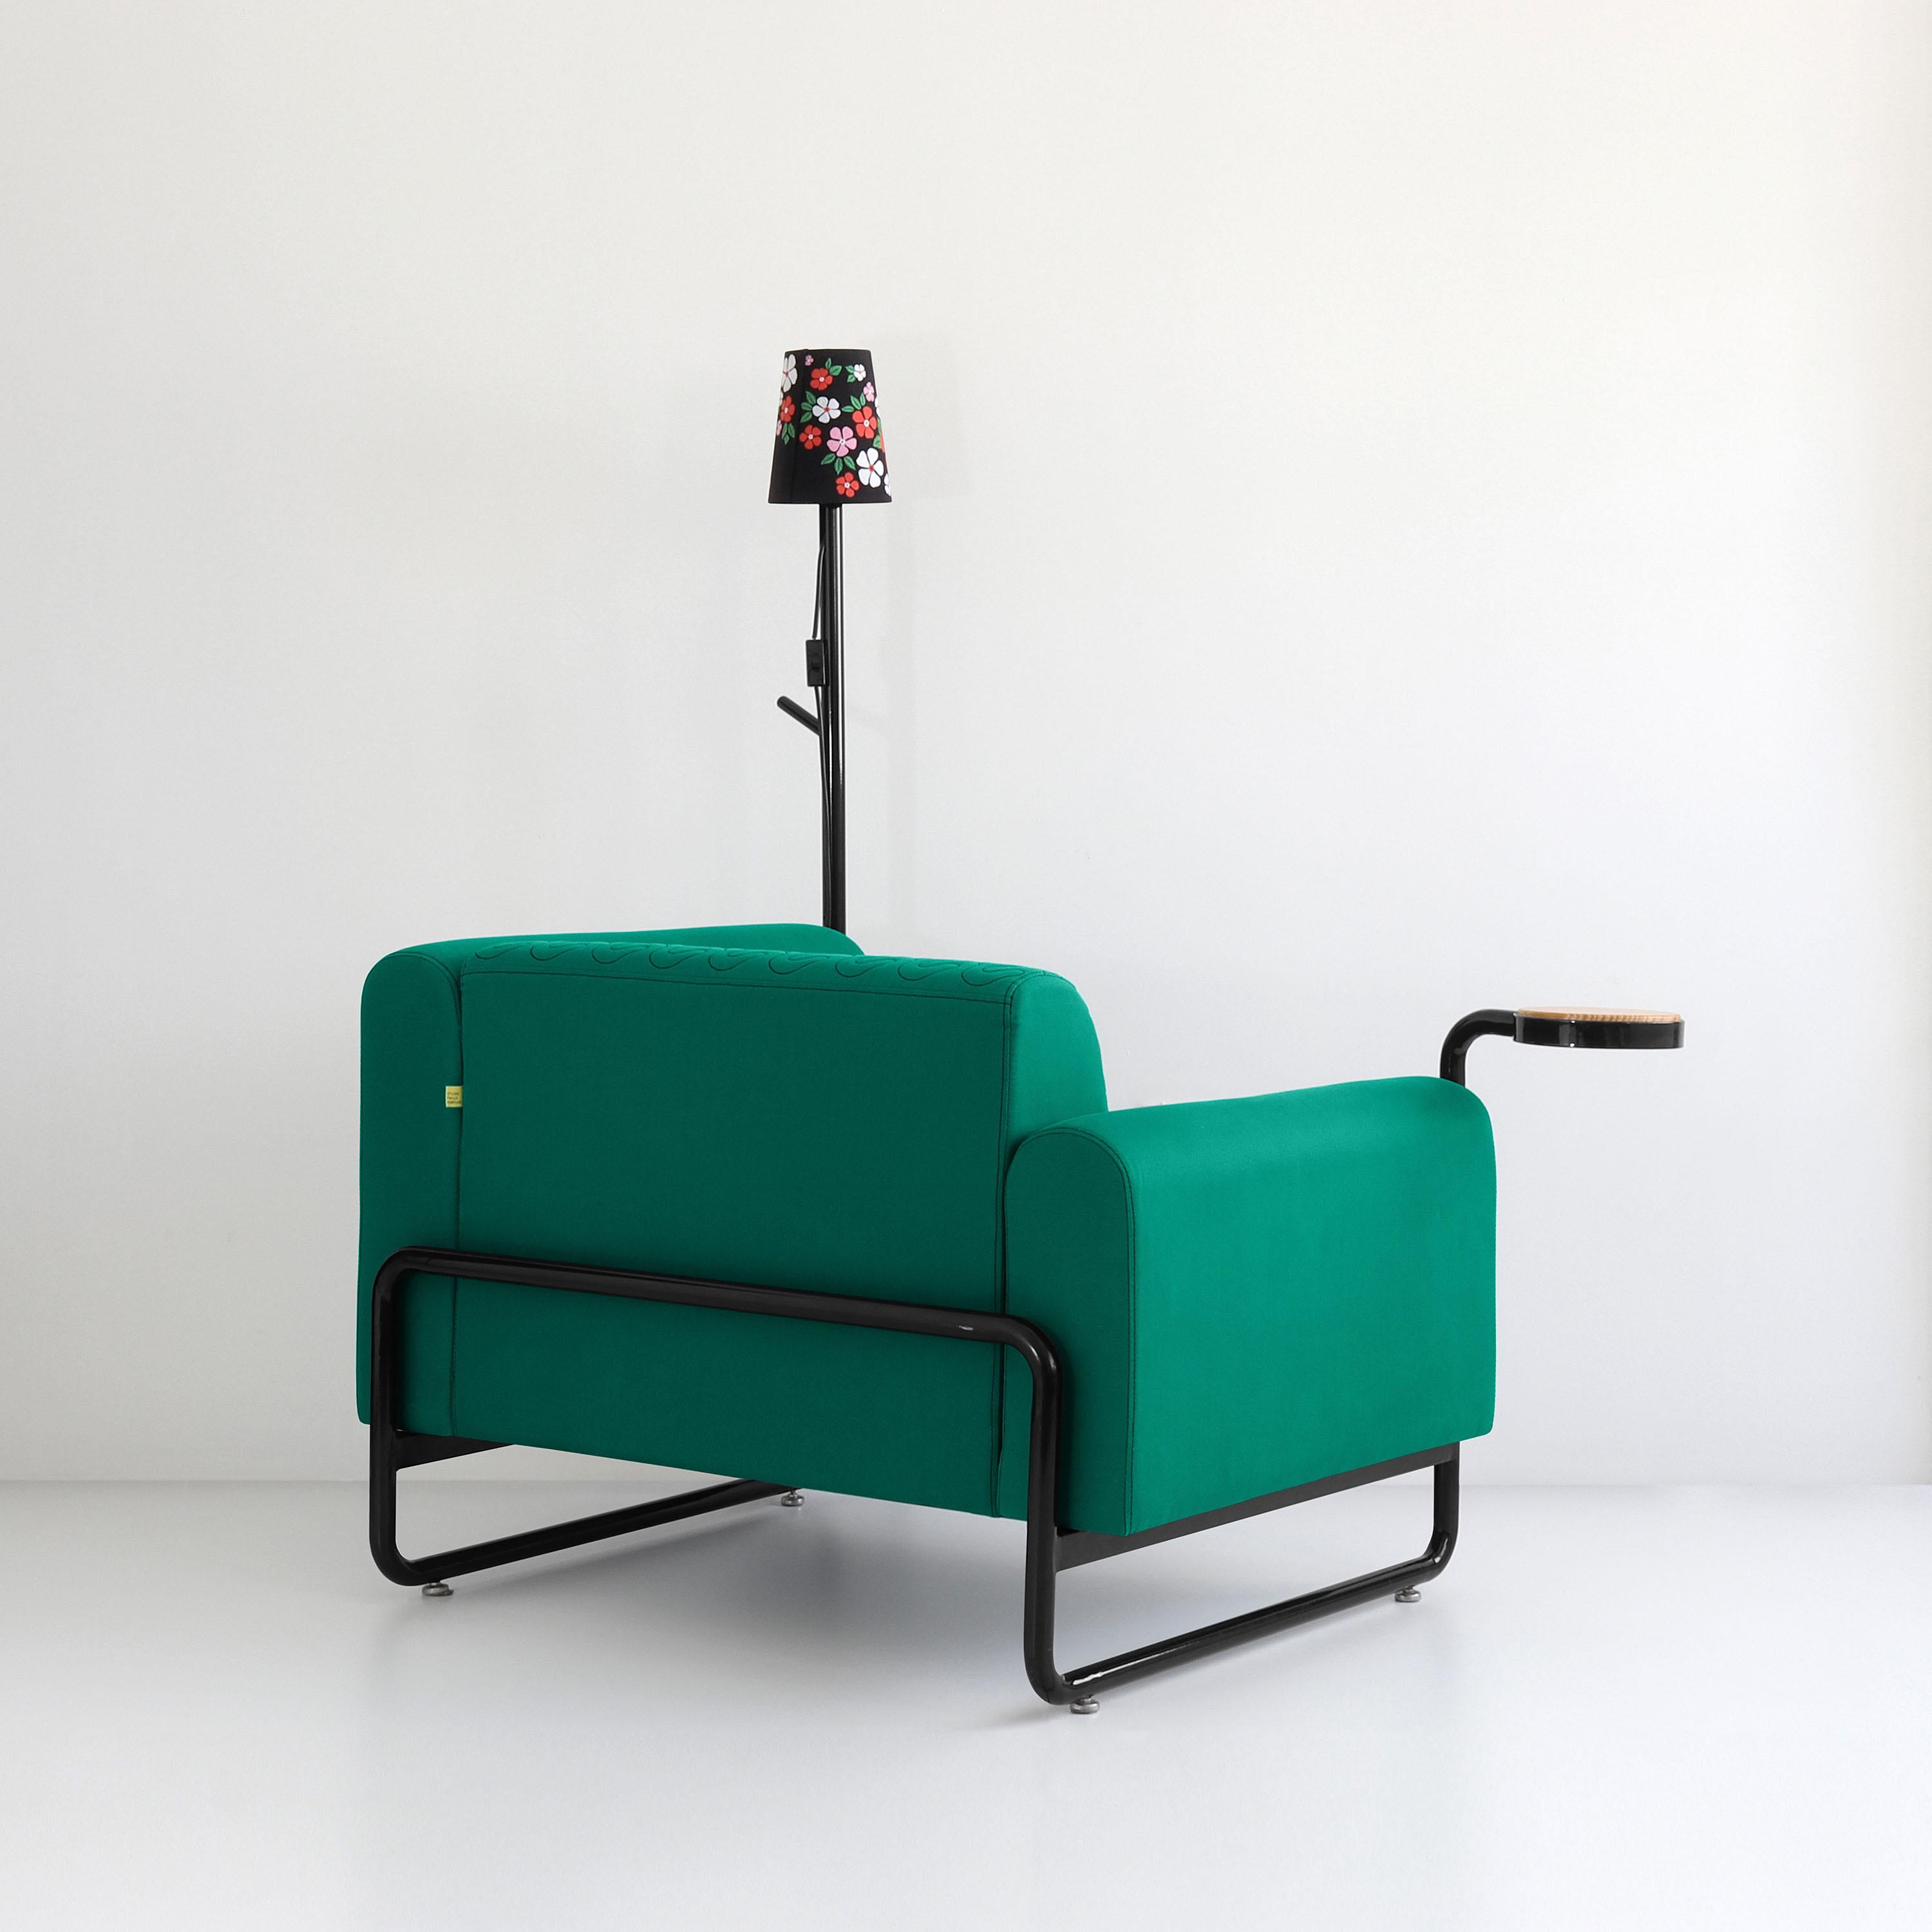 Green PK8 Armchair, Seat-Lamp Hybrid, Handmade Metal Structure by Paulo Kobylka In Good Condition For Sale In Londrina, Paraná